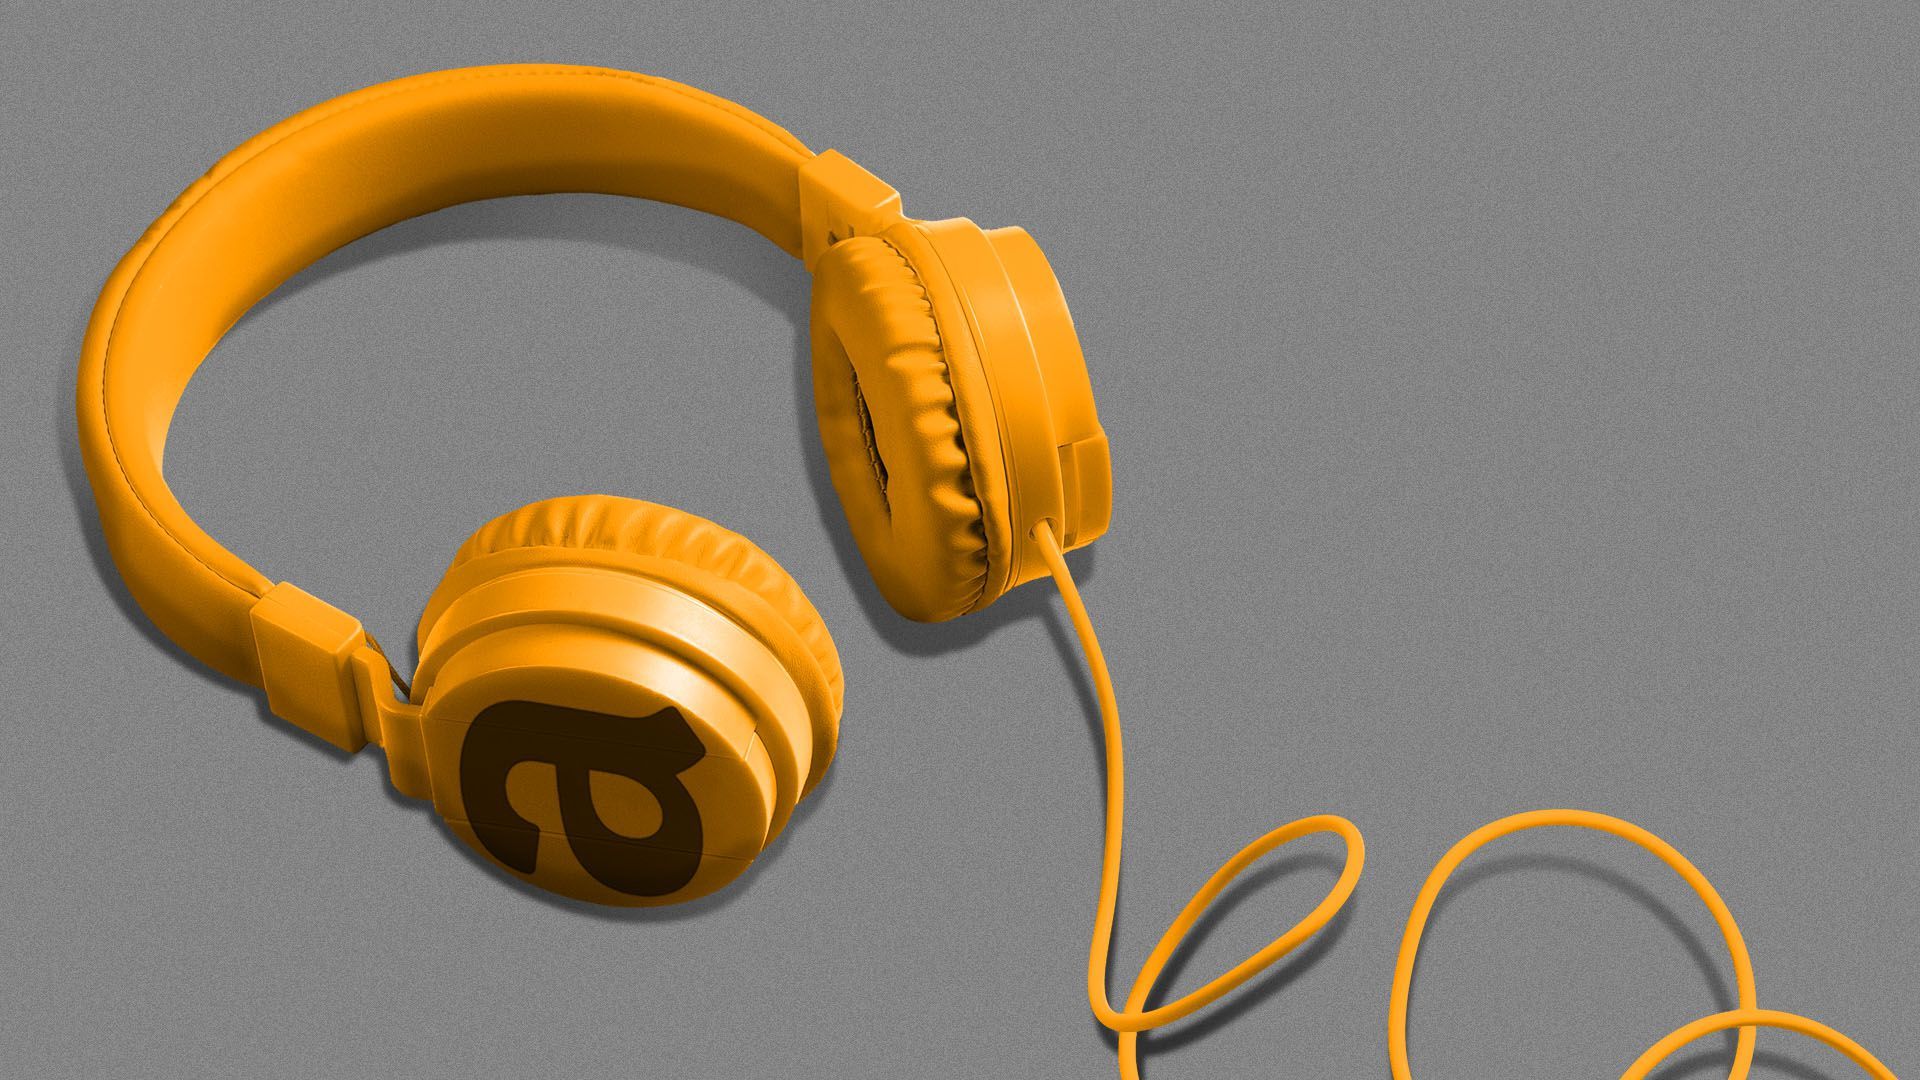 Illustrated of a pair of headphones in Amazon orange with the Amazon logo on the speaker